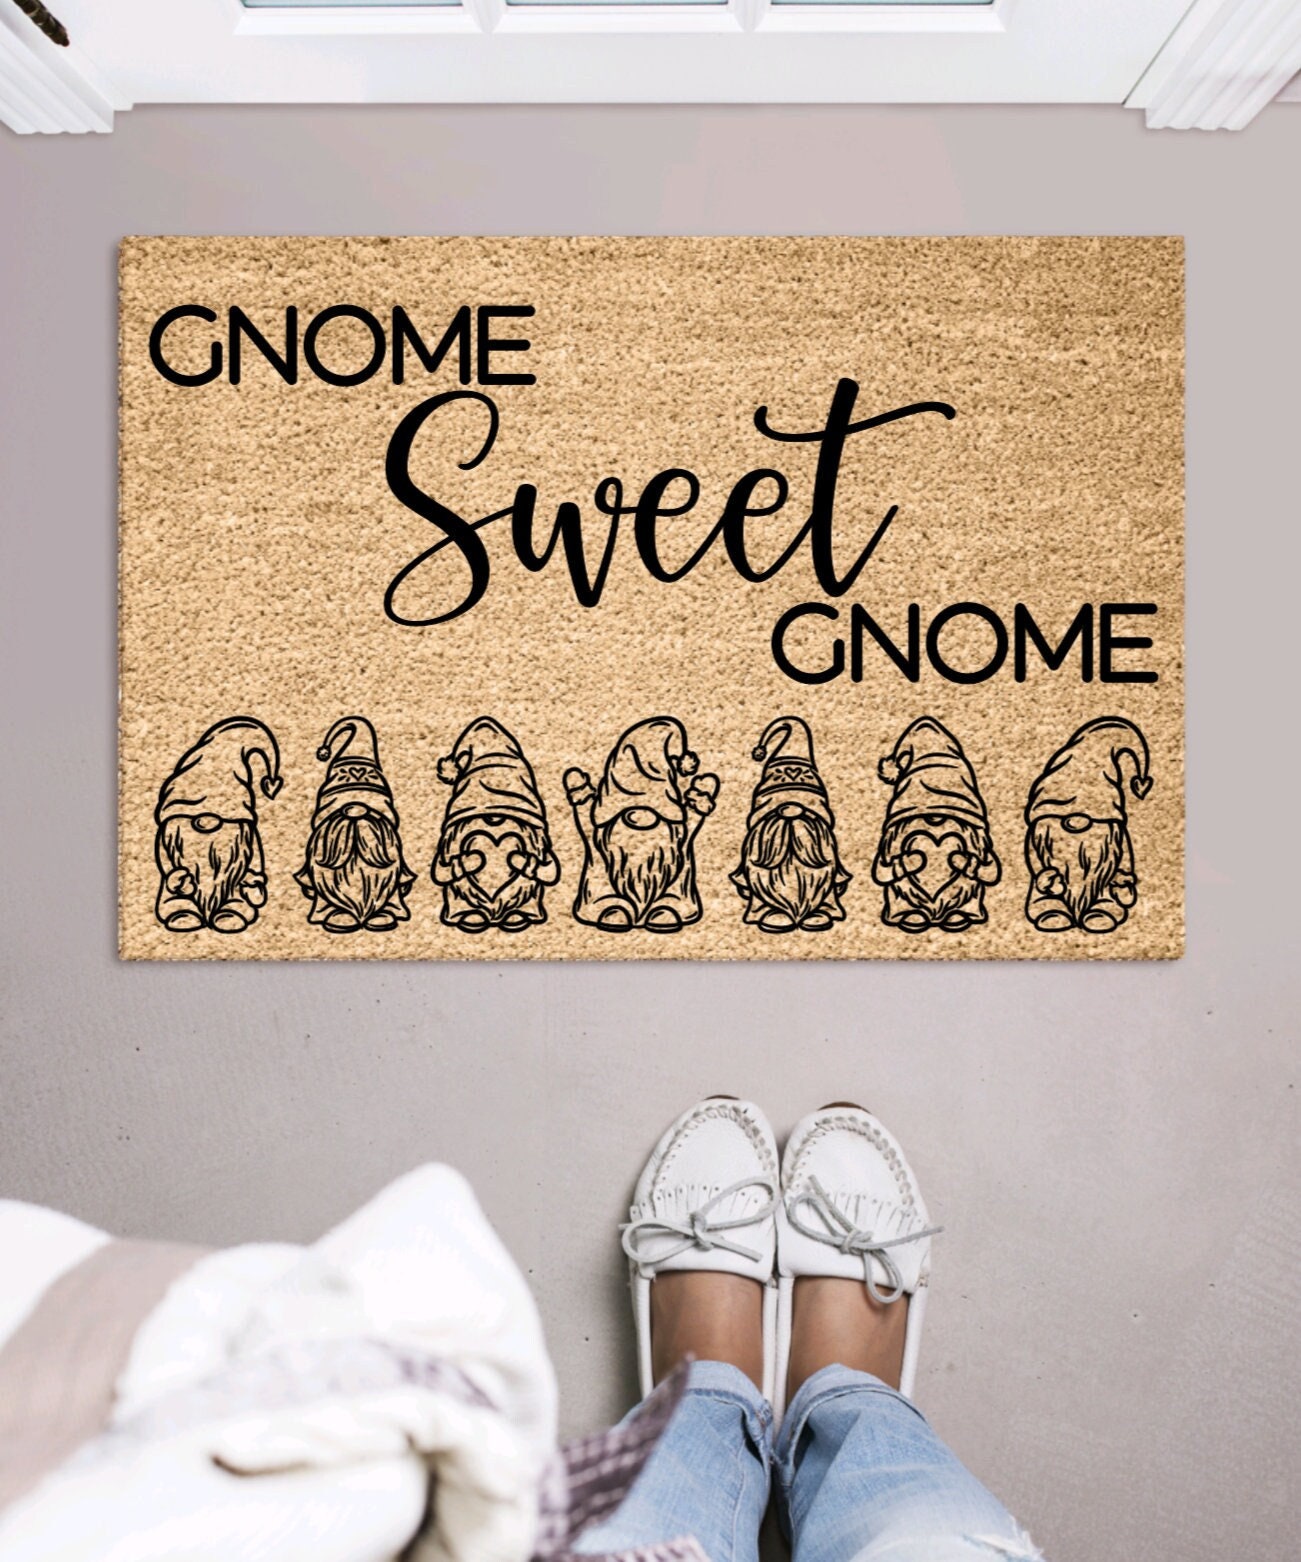  Funtery Winter Gnome Outdoor Christmas Mat Doormat Christmas  Door Mats Snowman Doormat Outdoor Indoor Entrance Rugs Funny Floor Anti  Slip Welcome Door Mats for Xmas Holiday Decoration, 16 x 28 Inch 